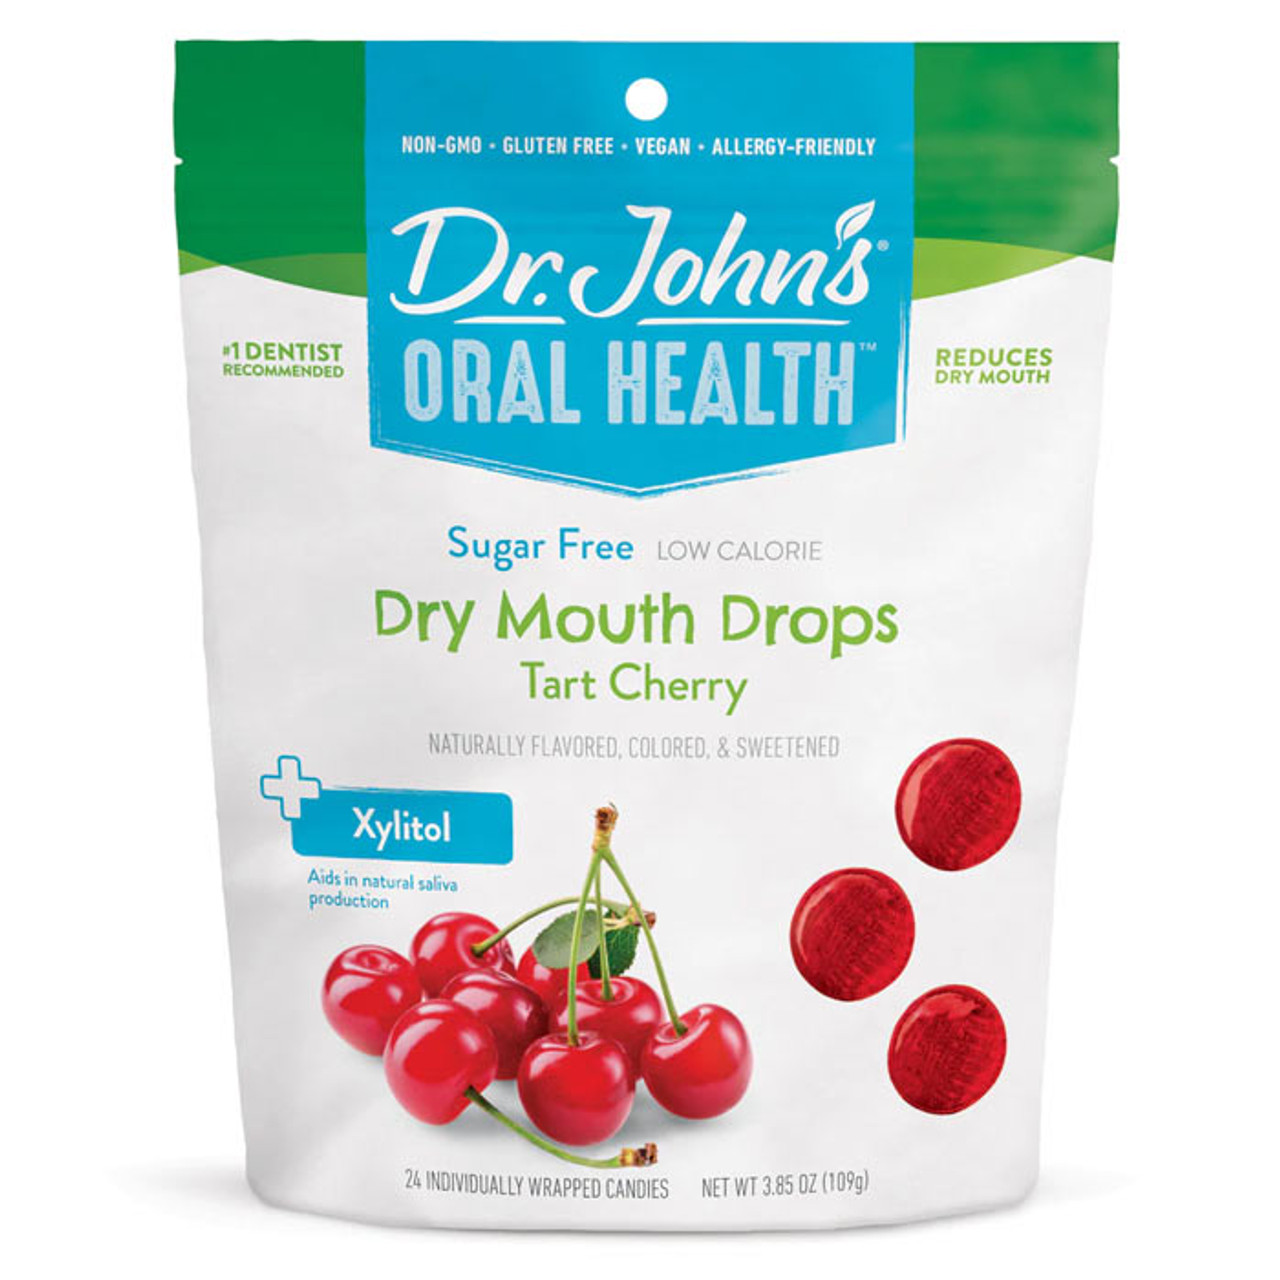 Dr. John's Oral Health Dry Mouth Drops